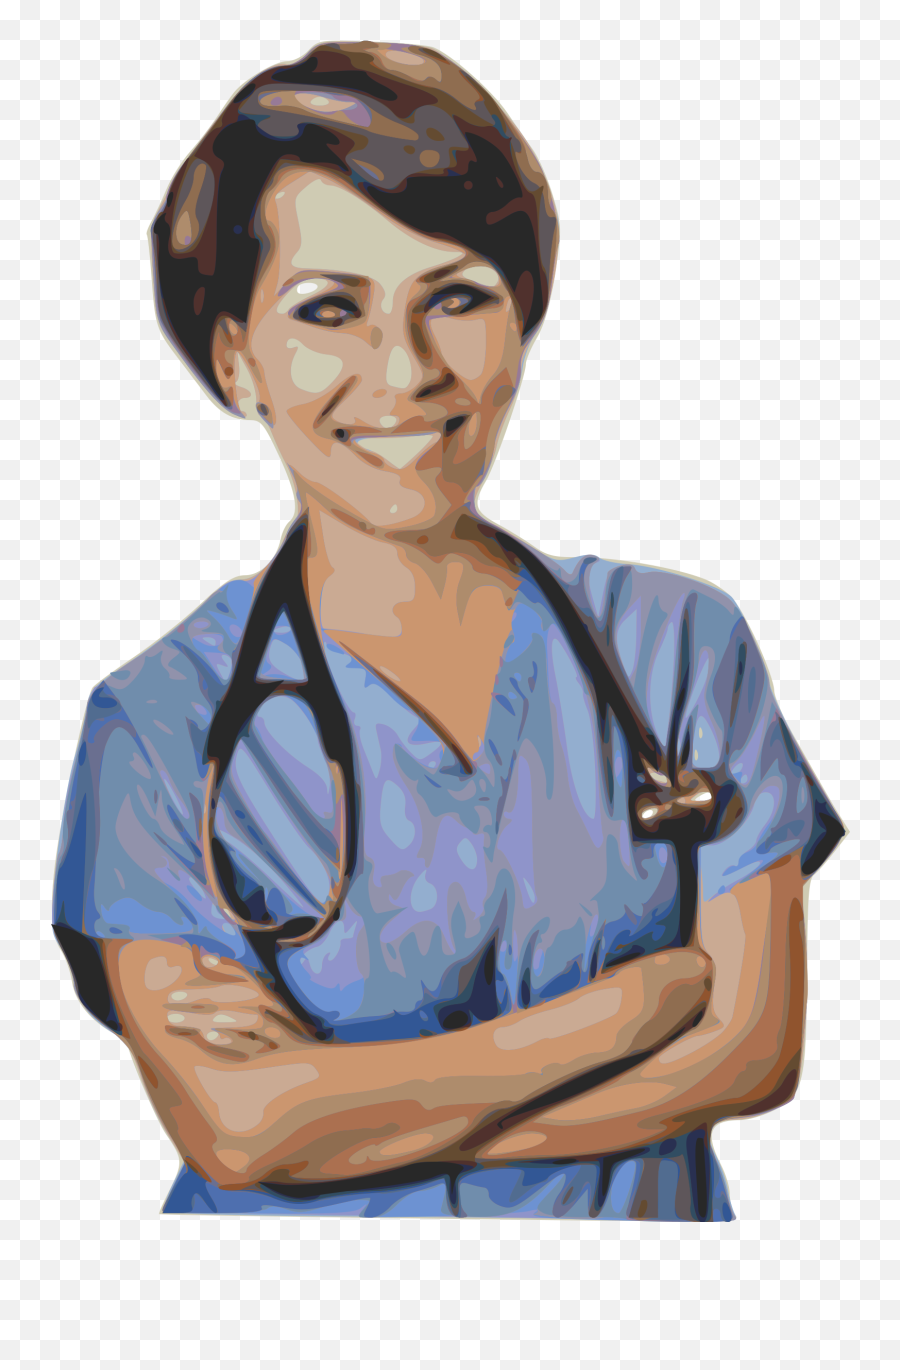 Nurse Clipart Png - This Free Icons Png Design Of Nurse Copyright Free Nurse,Nurse Clipart Png